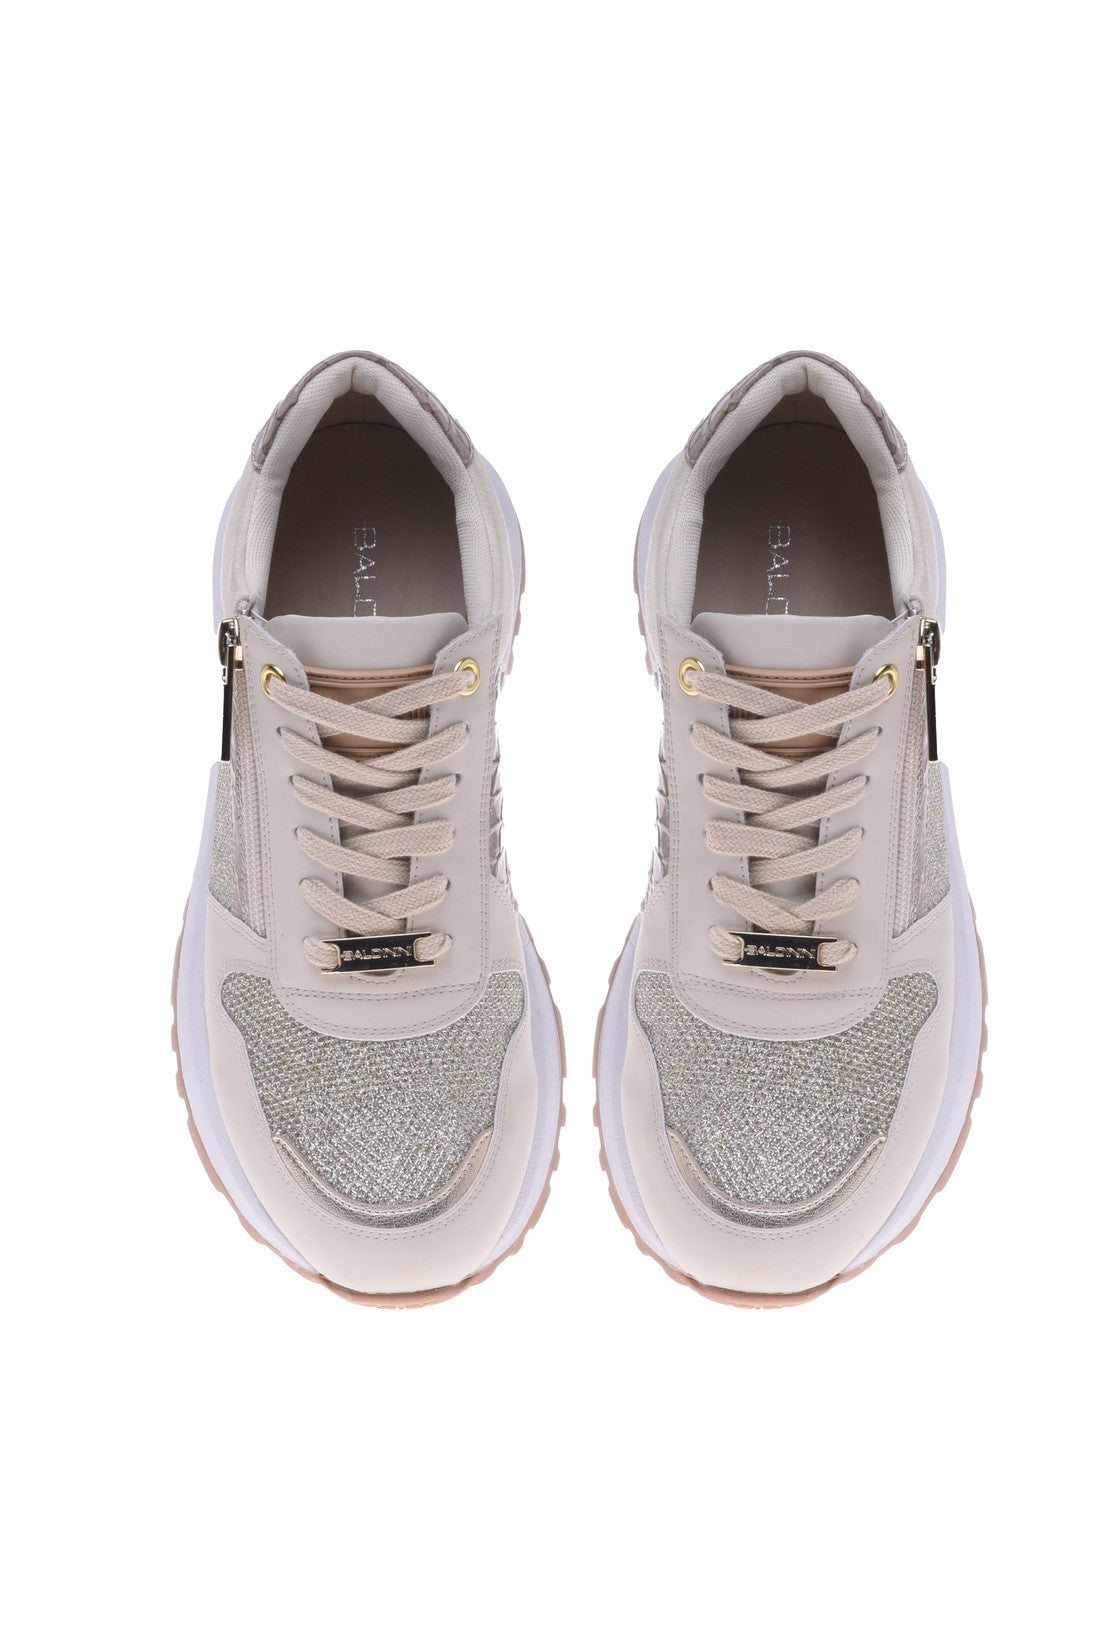 Sneaker in beige and platinum nappa leather and fabric